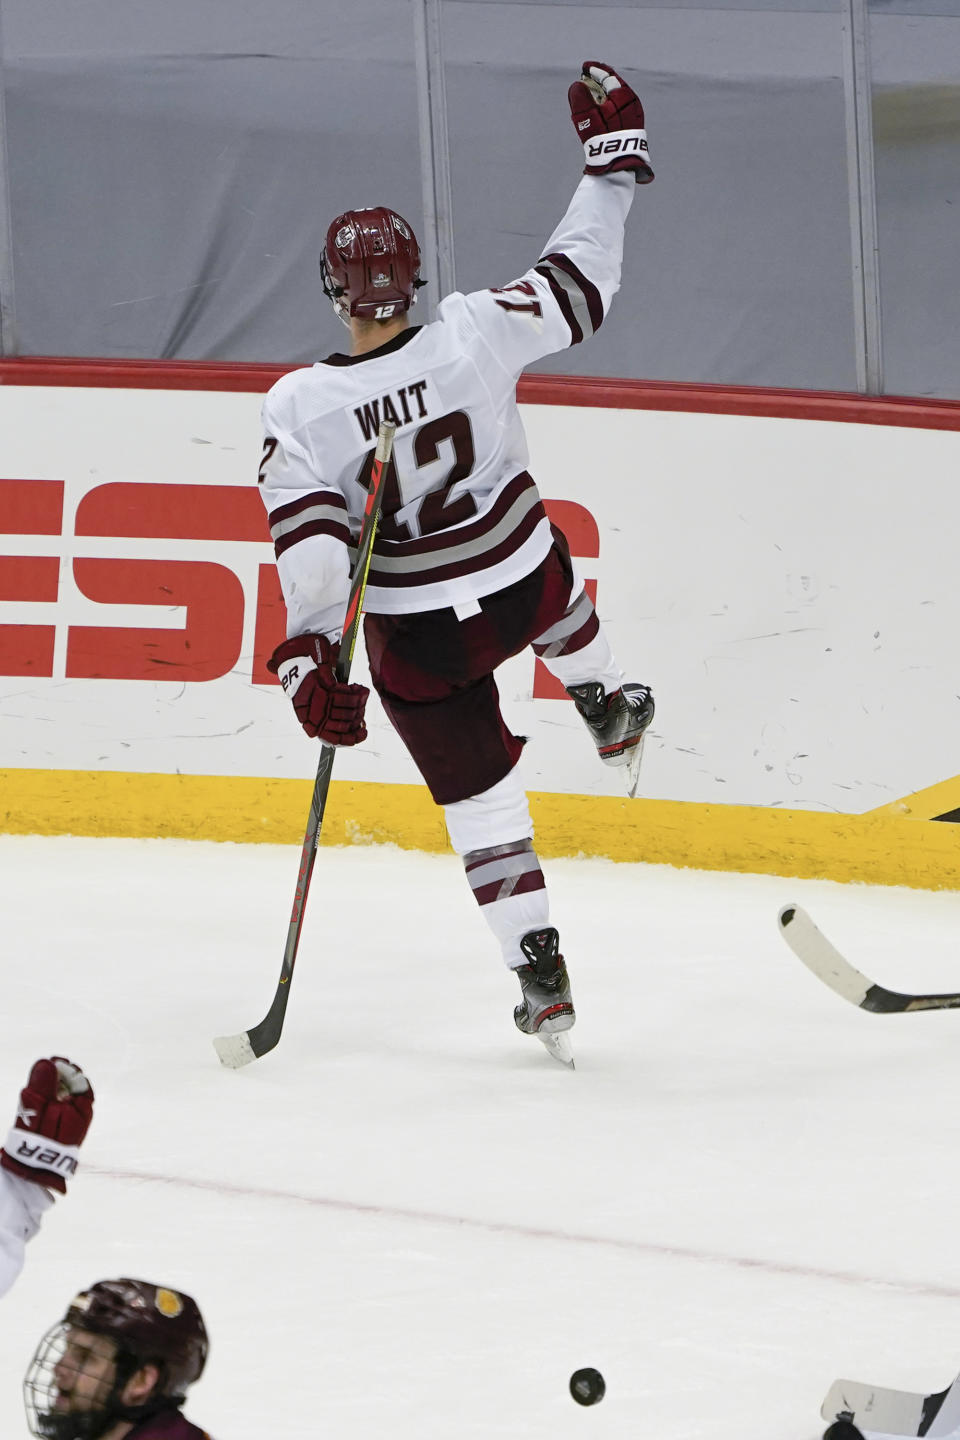 Massachusetts' Garrett Wait (12) celebrates after scoring against Minnesota Duluth during overtime in an NCAA men's Frozen Four hockey semifinal in Pittsburgh, early Friday, April 9, 2021. Massachusetts won 3-2 and will face St. Cloud State in the championship game Saturday. (AP Photo/Keith Srakocic)